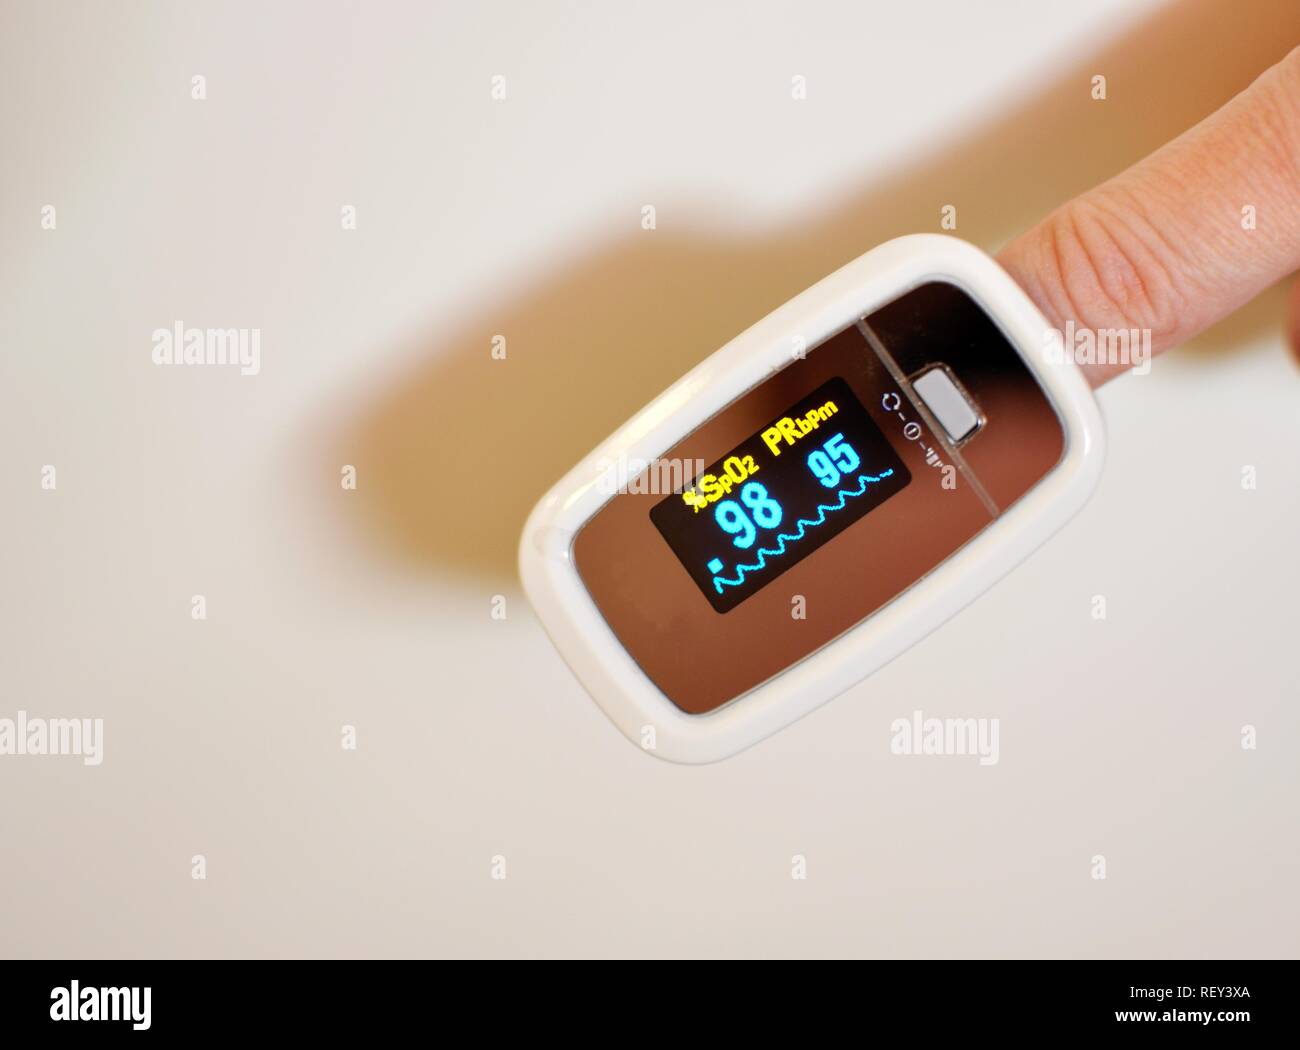 Top view of a digital pulse oximeter with a white finger inside and an electronic display with measurements. Medical device. Stock Photo